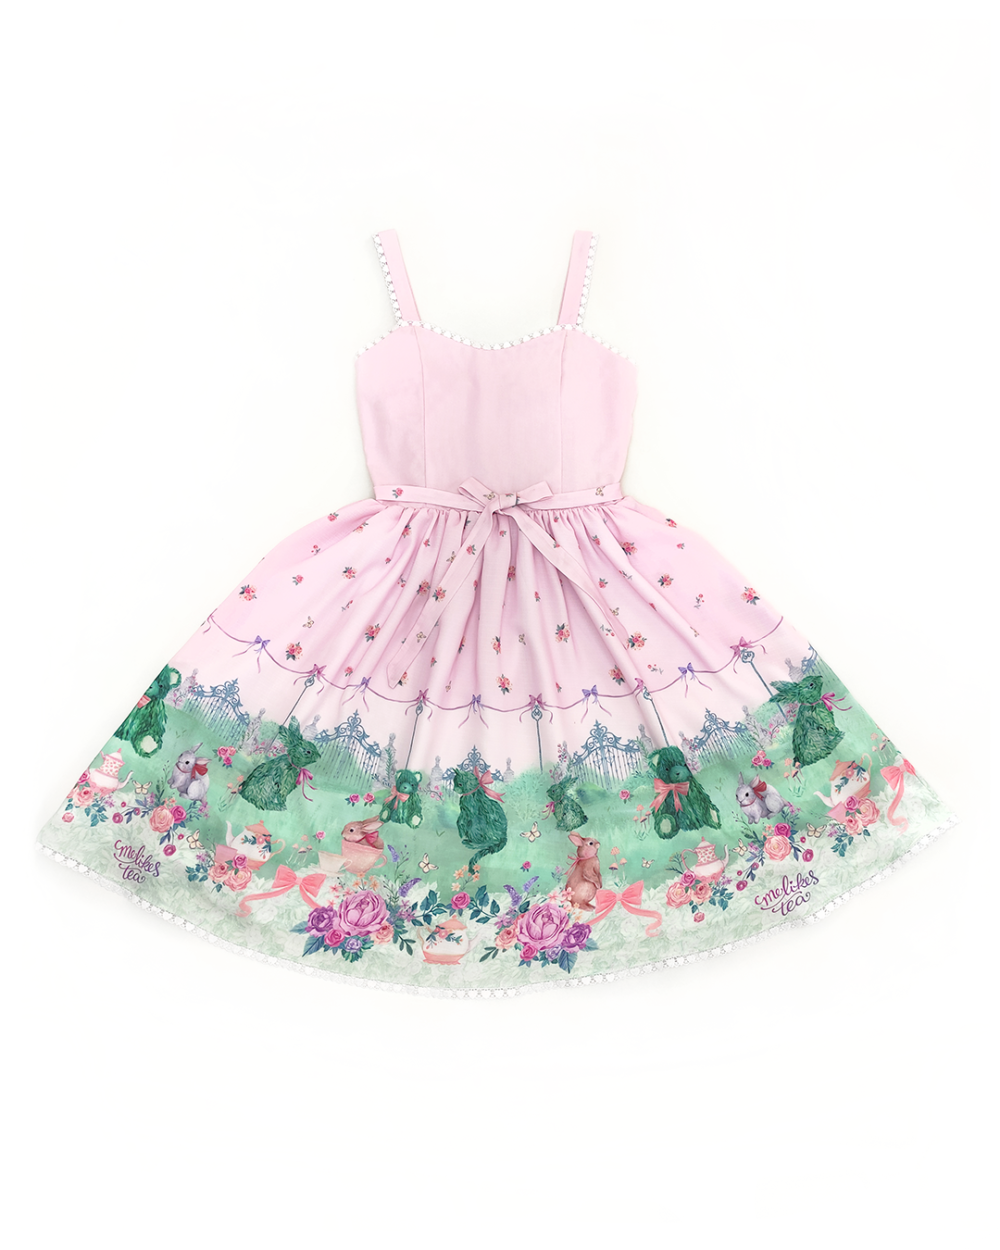 Dress made of pink polyester and cotton printed with a garden full of bunnies, teddy bears, cups and teapots, flowers and a beautiful lawn.